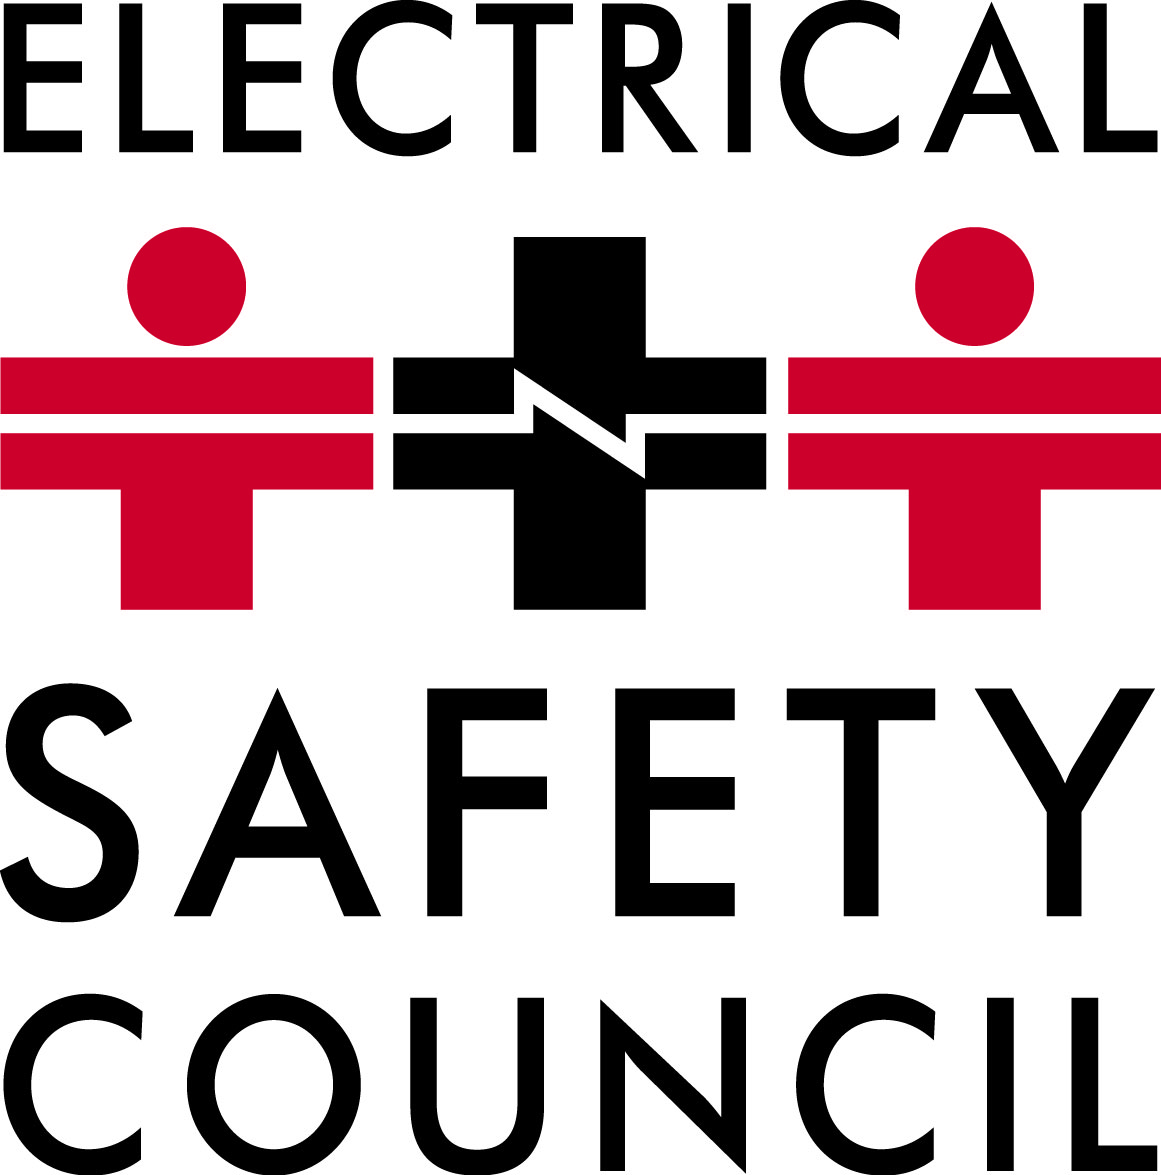 Electrical Safety Council.jpg